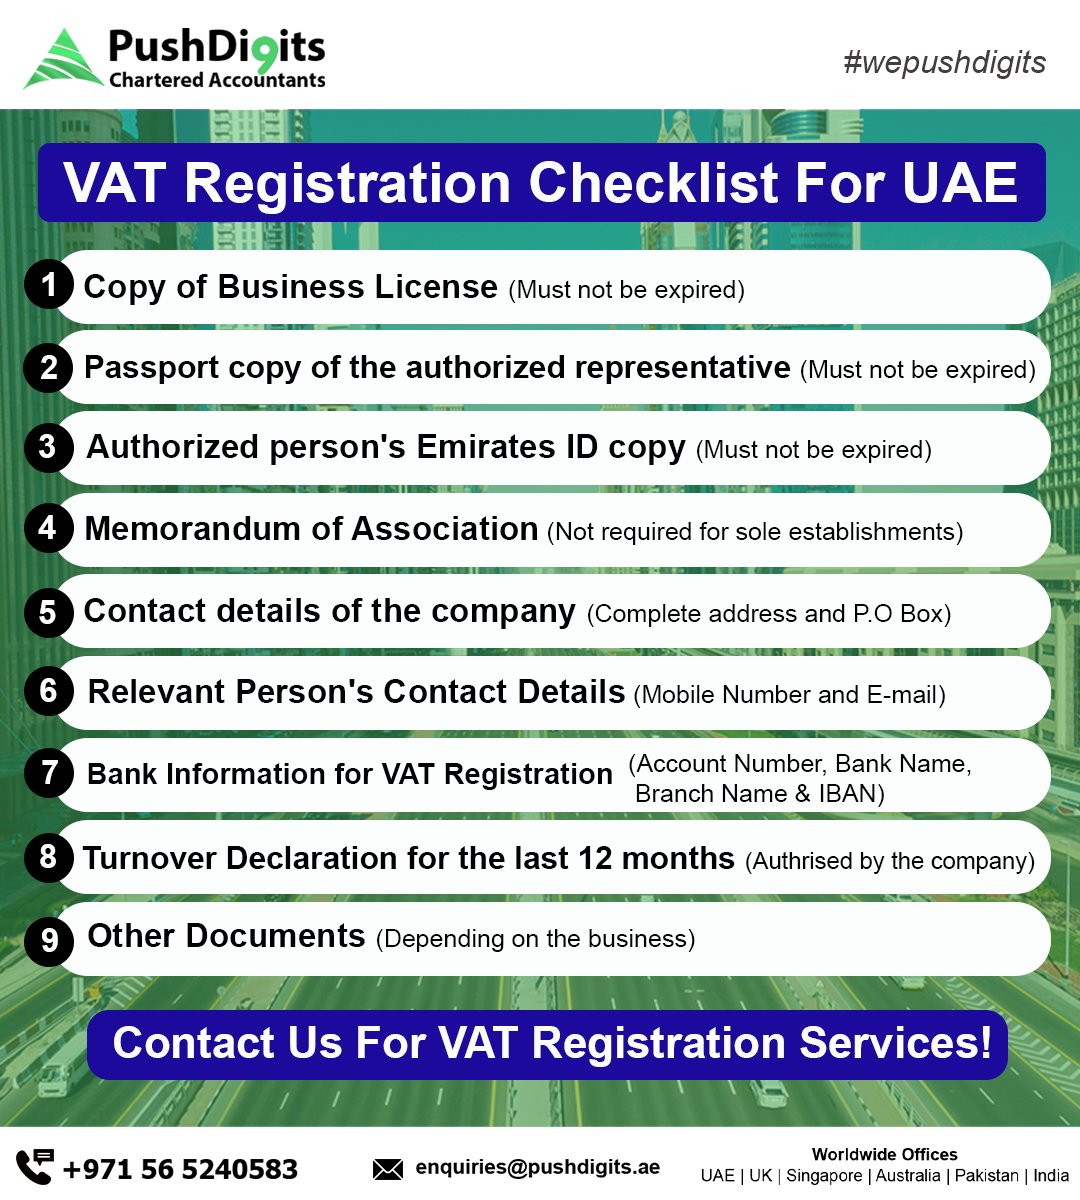 Don’t let VAT registration overwhelm you in the UAE! With Push Digits, you’re in good hands. Our detailed checklist ensures nothing slips through the cracks. Let’s make compliance easy together.

pushdigits.ae

#vatregistration #uaevat #vatuae #taxregistration